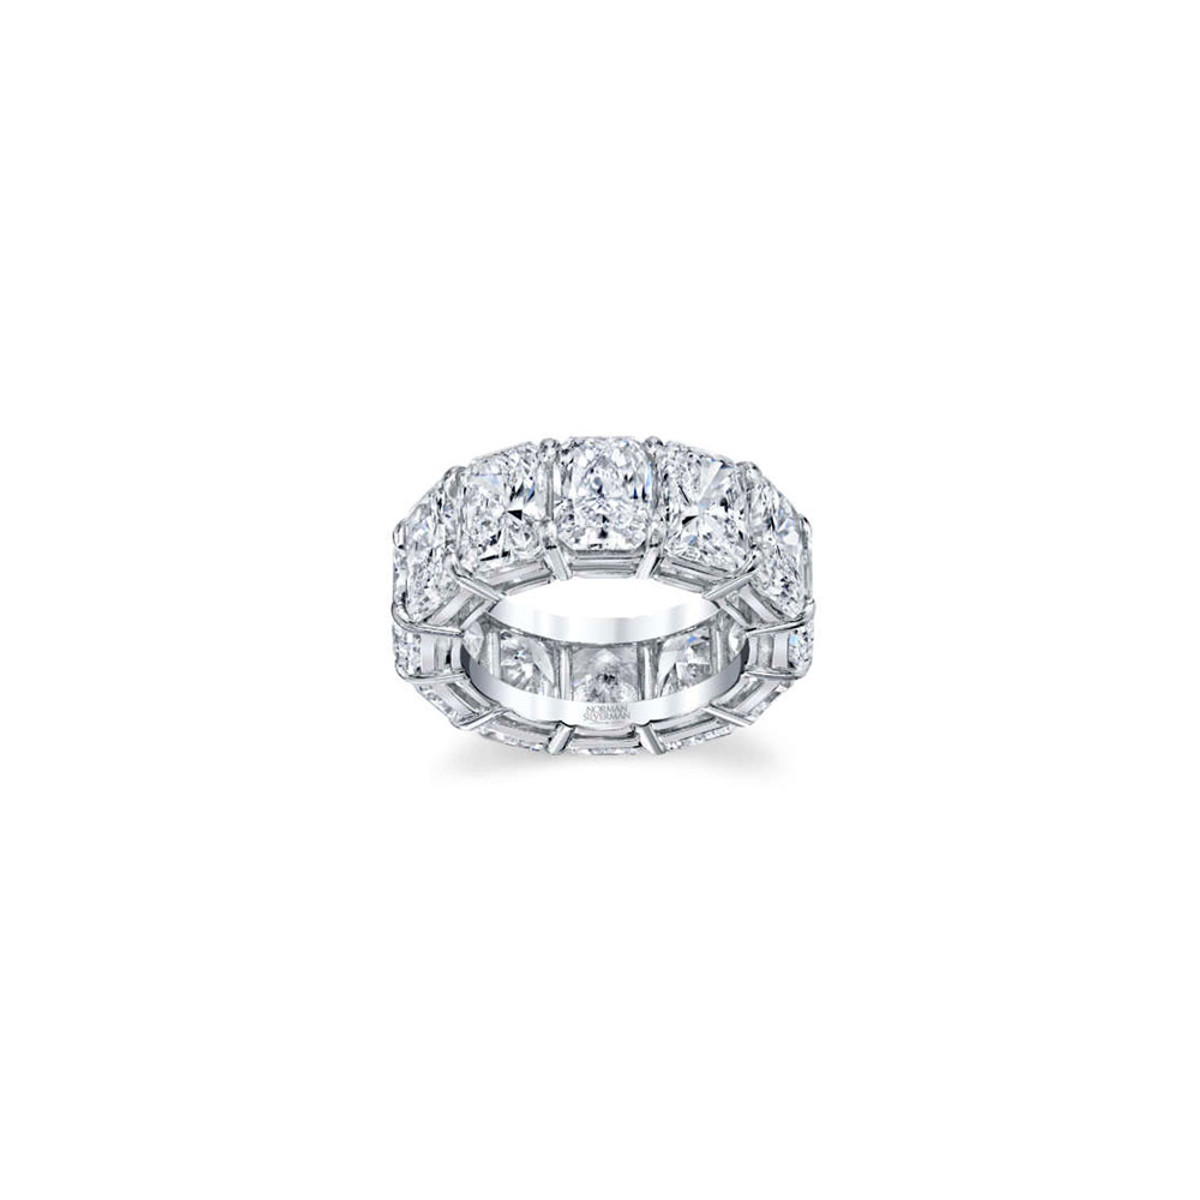 Hyde Park Collection 18K White Gold Radiant Diamond Eternity Band-23011 Product Image